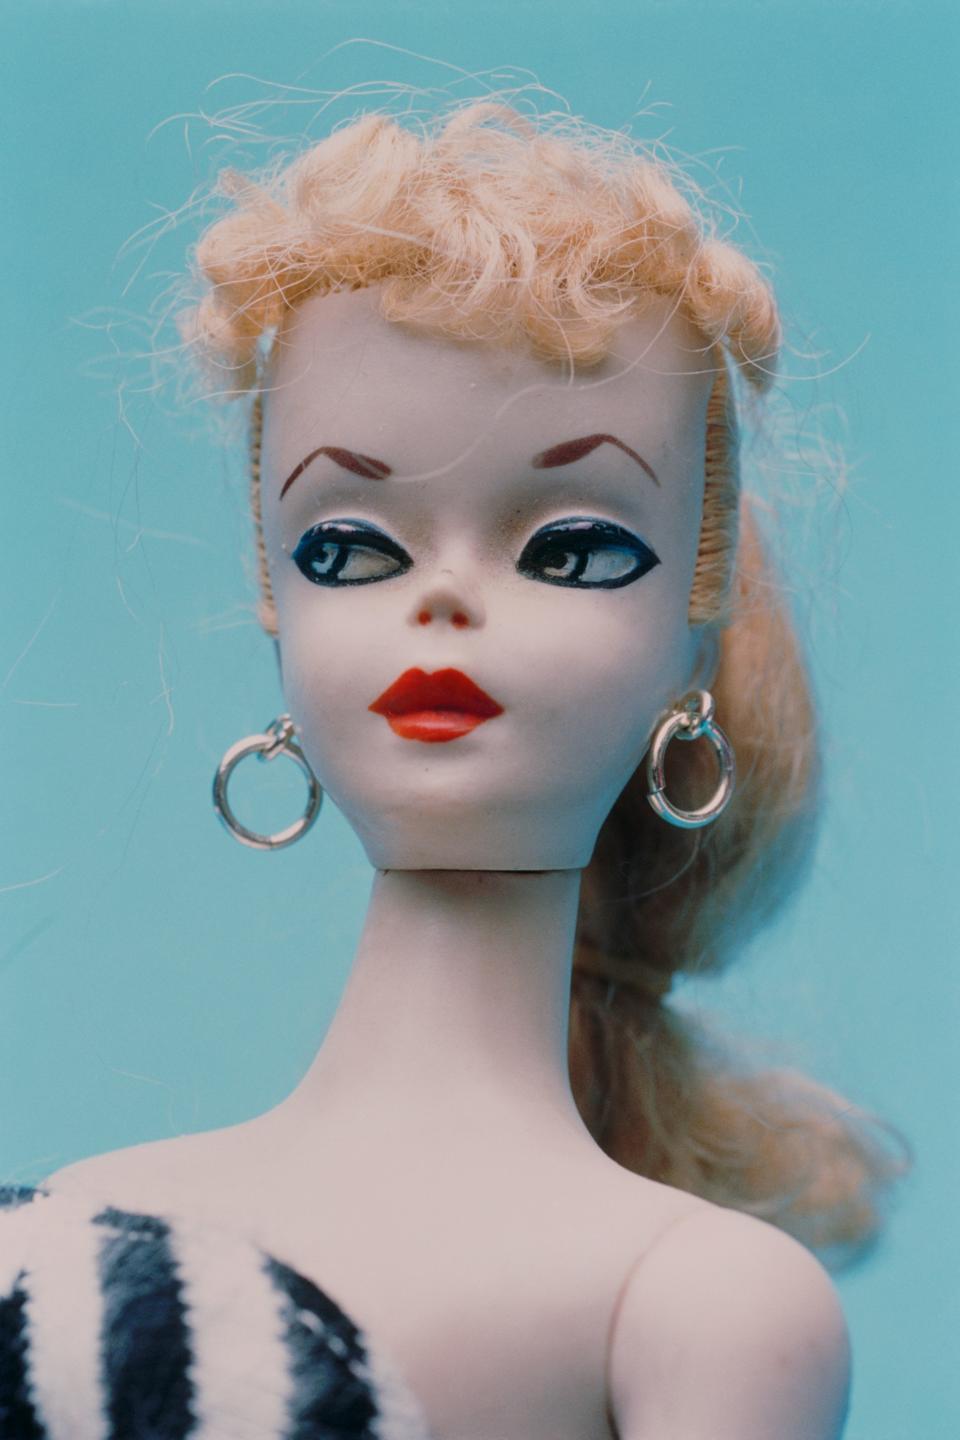 The first Barbie, who came out in 1959.